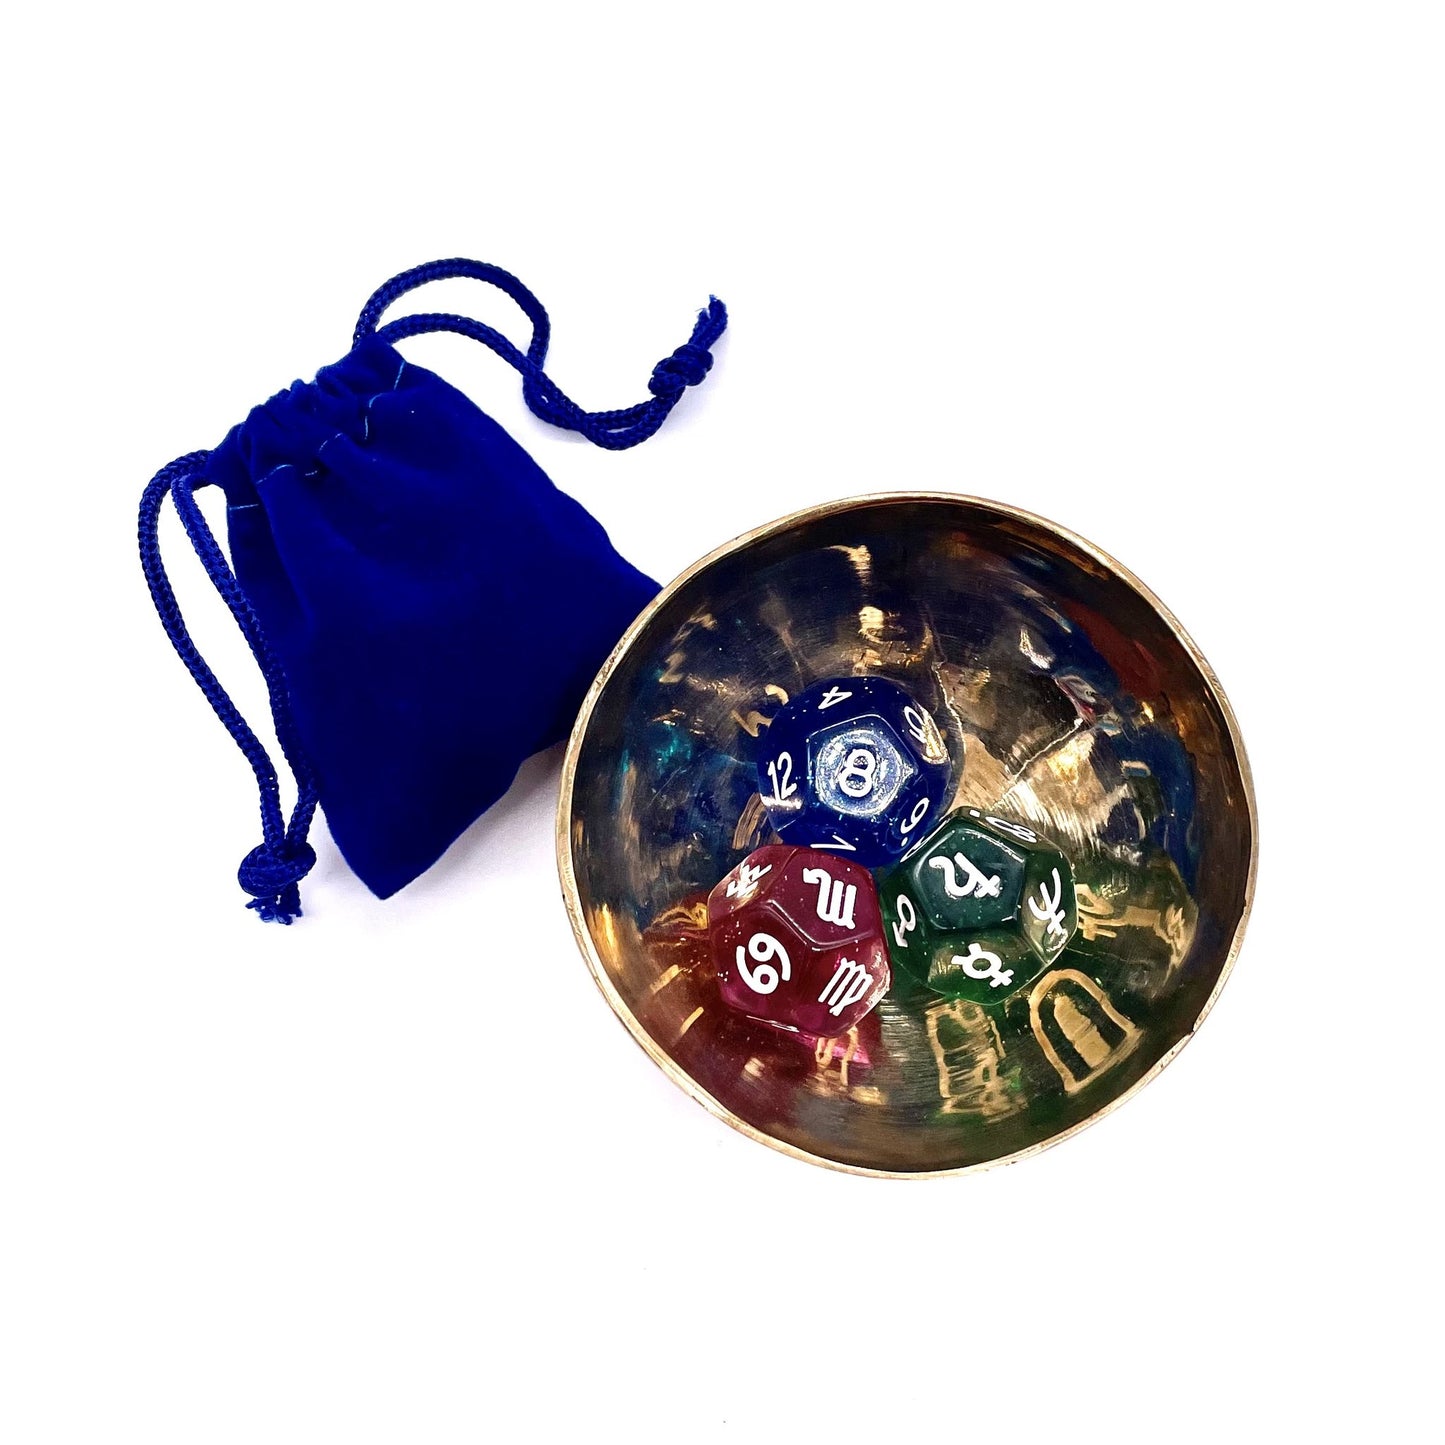 Three astro dice inside a gold bowl next to a blue velvet pouch.